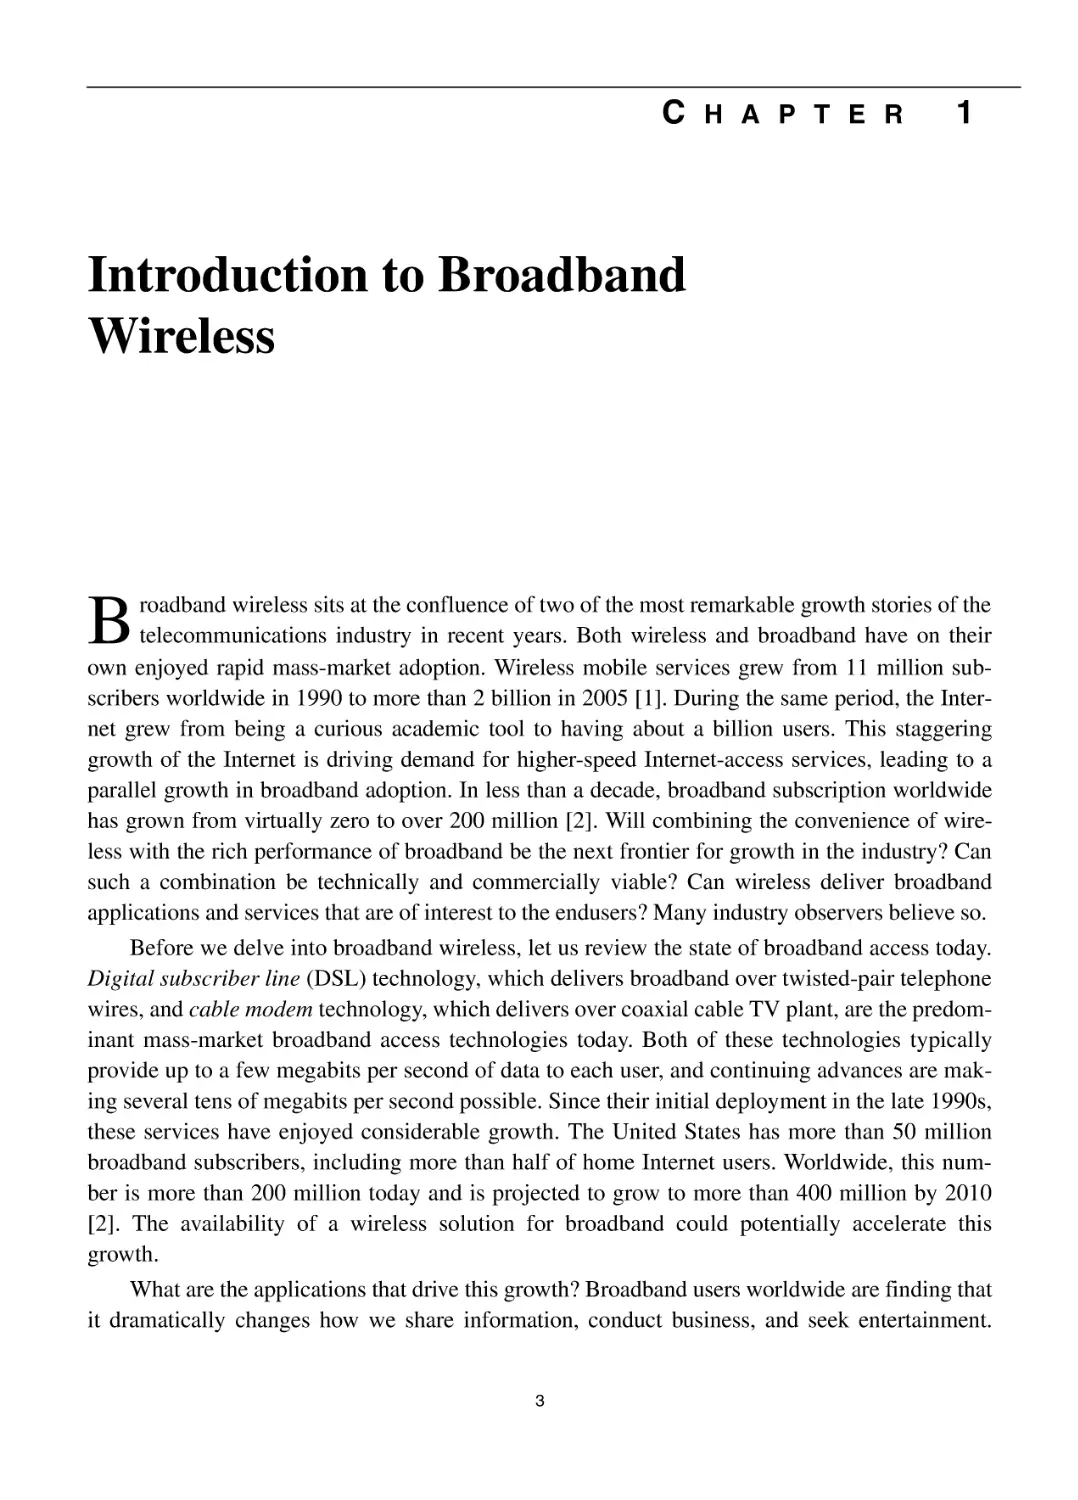 Chapter 1 Introduction to Broadband Wireless